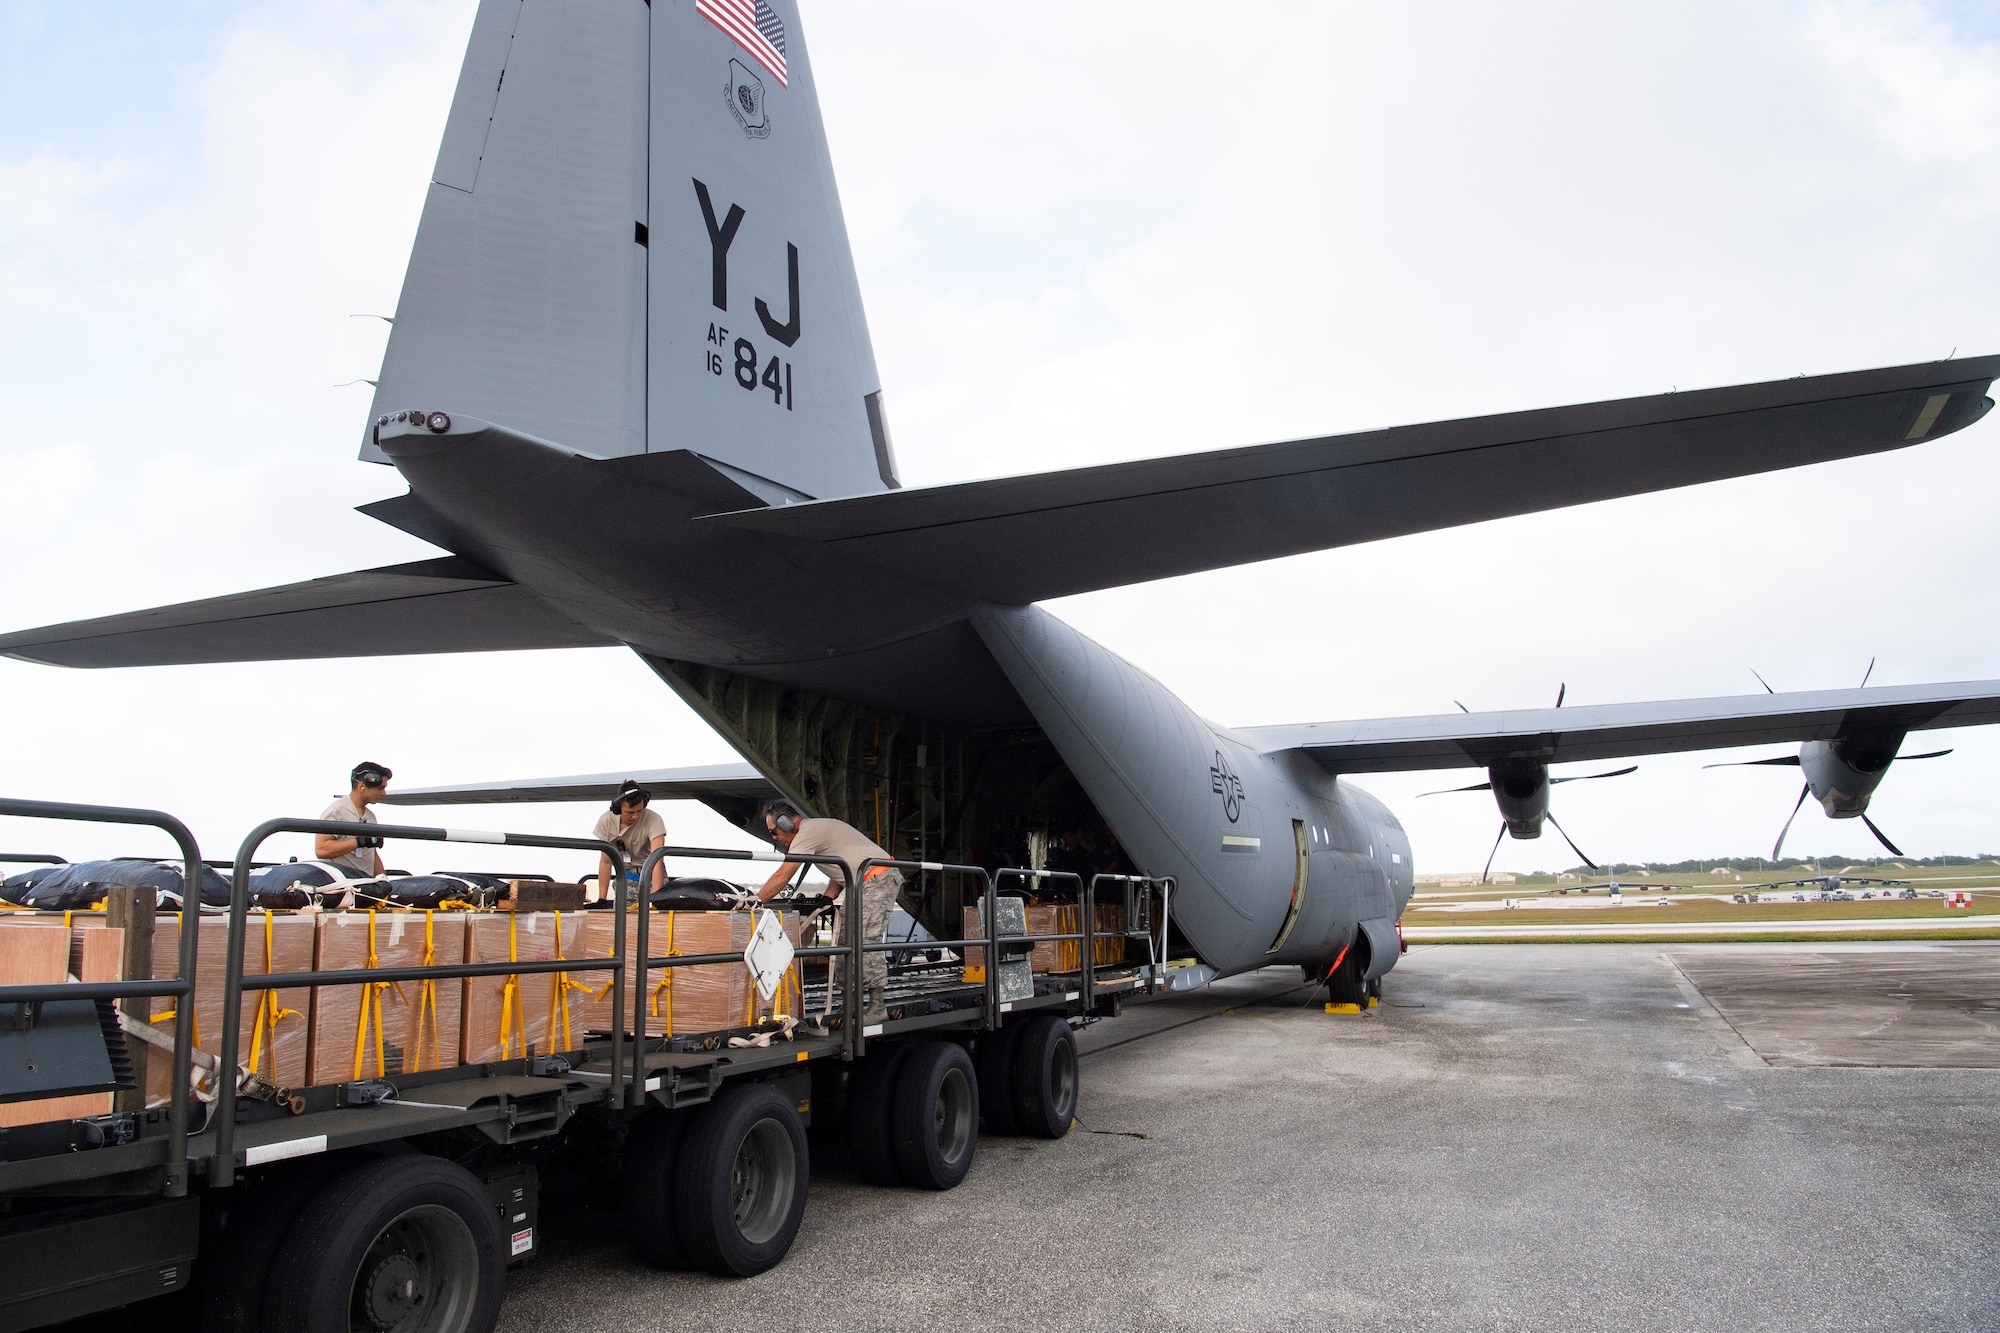 U.S. Air Force air transportation specialists with the U.S. Air Force Reserve’s 44th Aerial Port Squadron load a U.S. Air Force C-130J Hercules Dec. 11, 2018, with airdrop bundles for airdrop during Operation Christmas Drop at Andersen Air Force Base, Guam. Operation Christmas Drop is a U.S. Air Force-led trilateral training event that includes air support from the Japanese Air Self Defense Force and Royal Australian Air Force to airdrop supplies to the Commonwealth of the Northern Marianas, Federated States of Micronesia, and the Republic of Palau. (U.S. Air Force photo by Jerry R. Bynum)